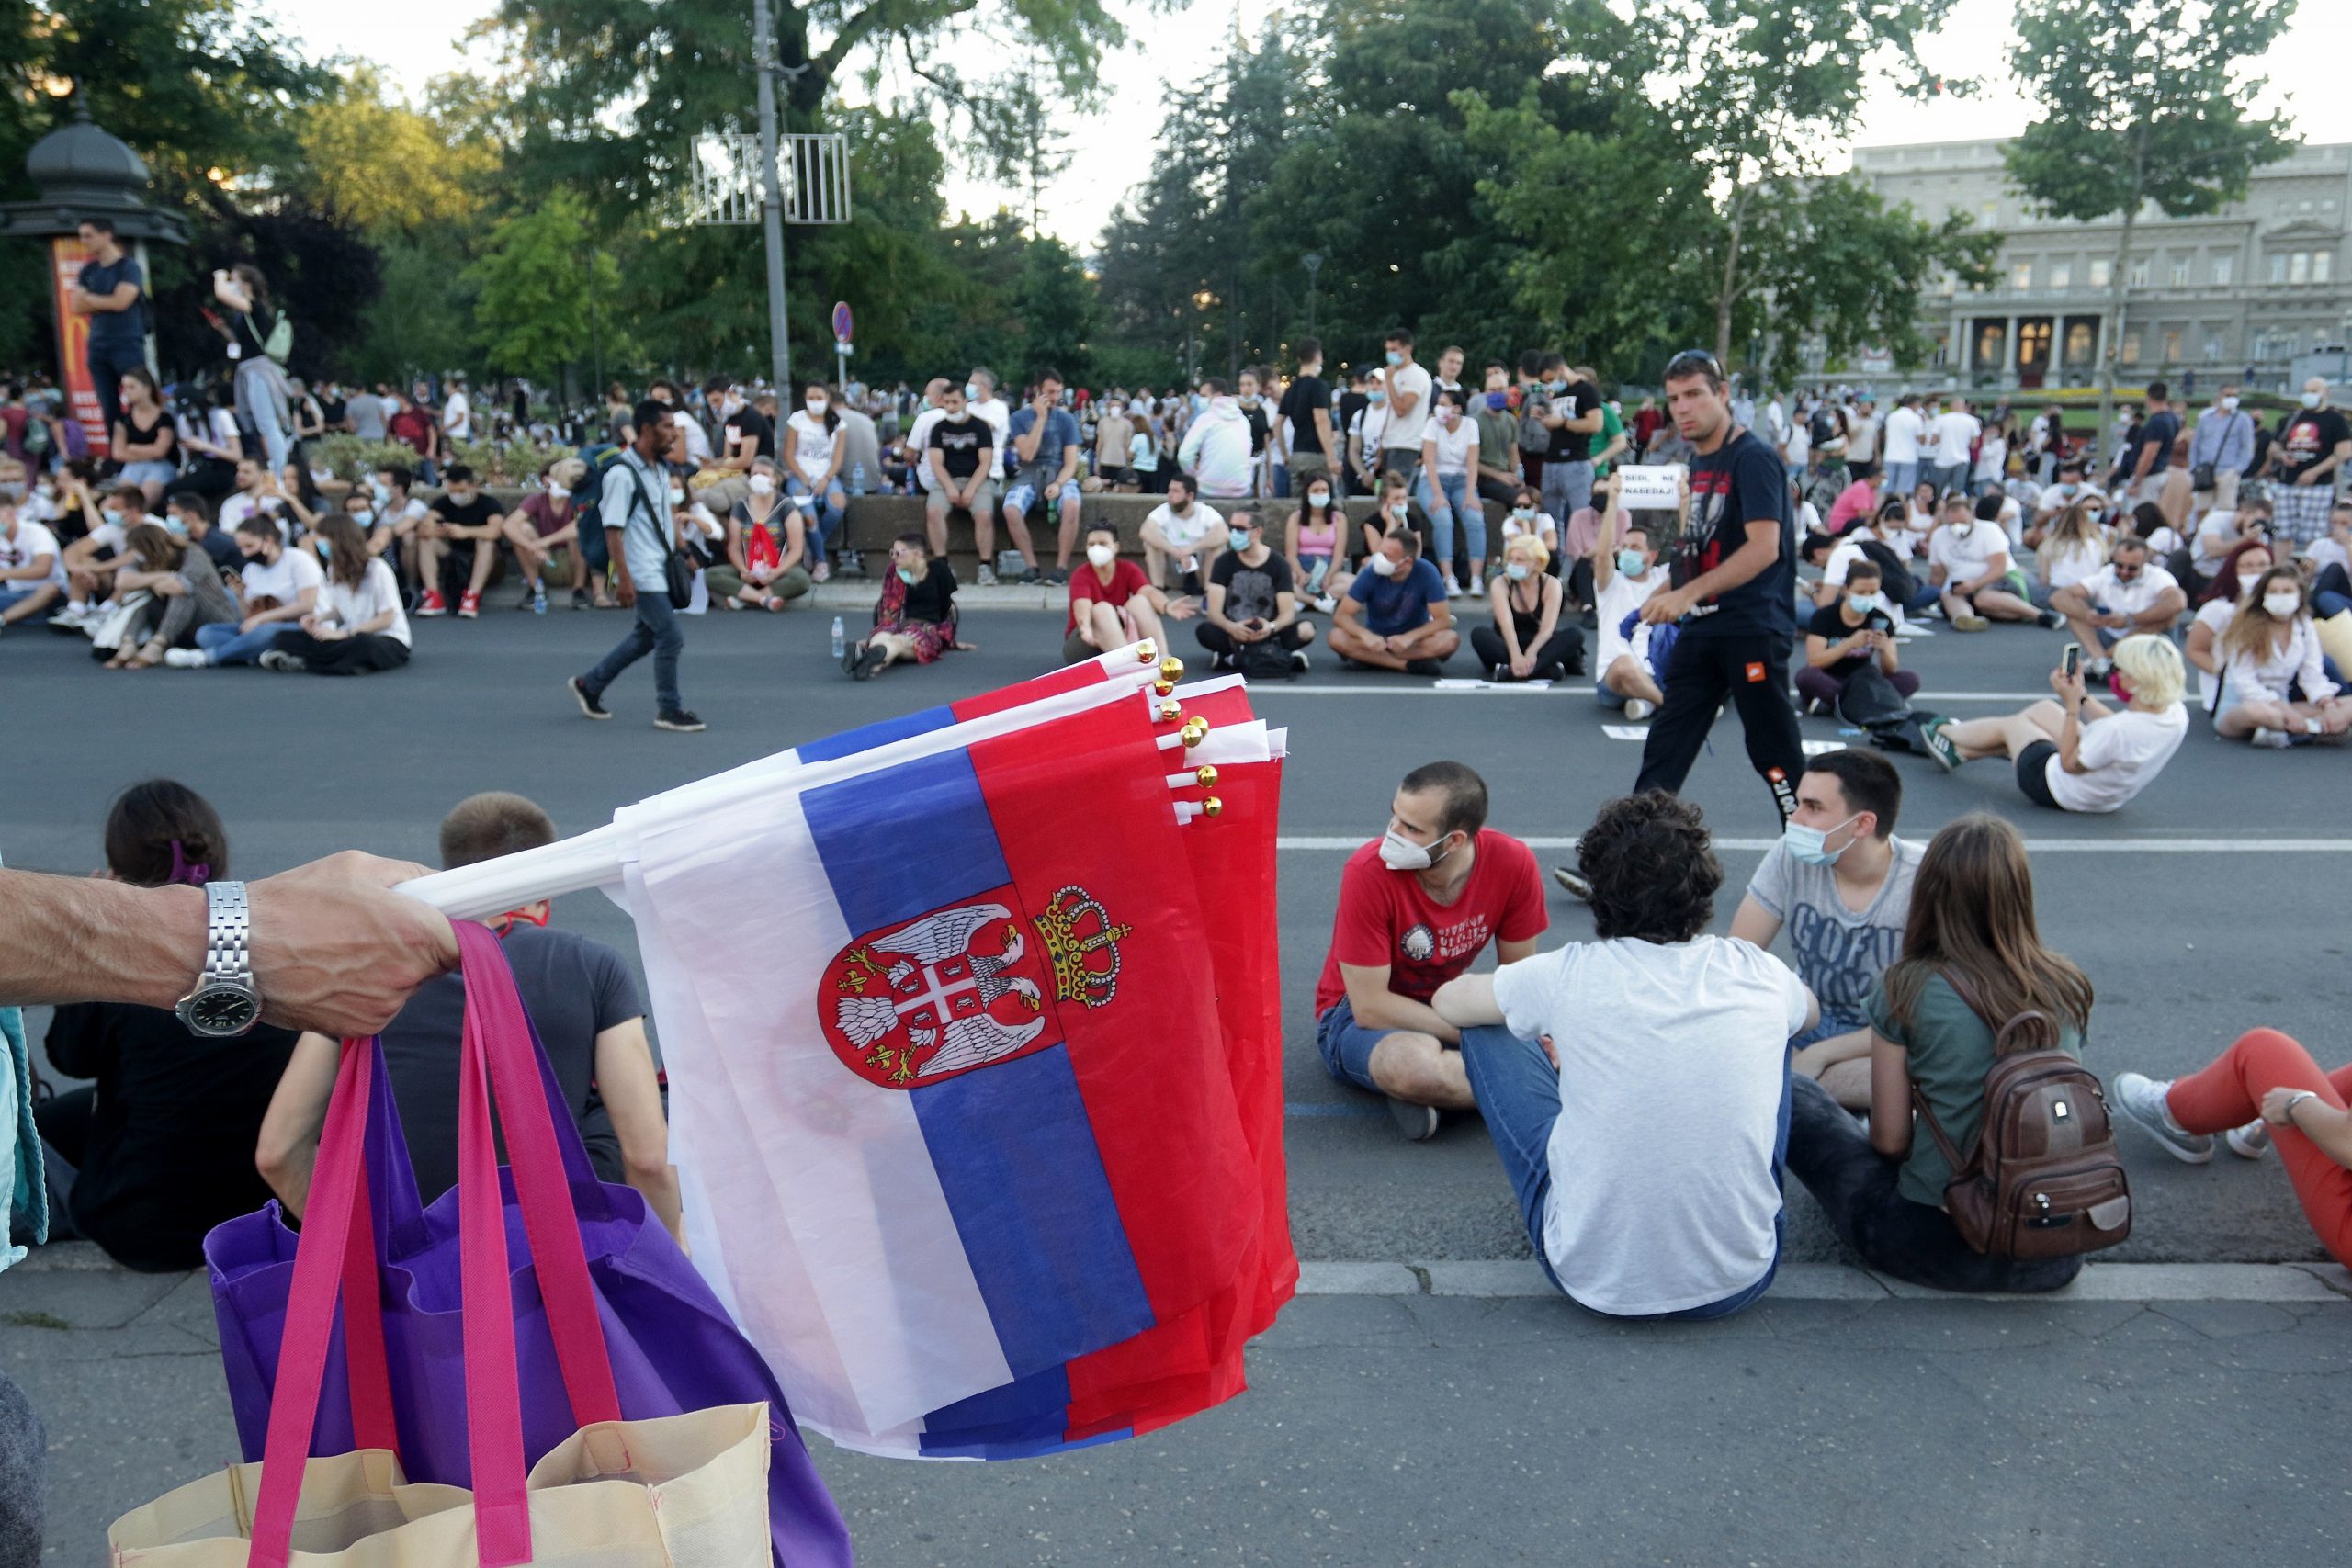 09, July, 2020, Belgrade - Peaceful protest of citizens in front of the Assembly of Serbia . Photo: Antonio Ahel/ATAImages

09,jul, 2020, Beograd - Miran protest gradjana ispred Skupstine Srbije. Photo: Antonio Ahel/ATAImages